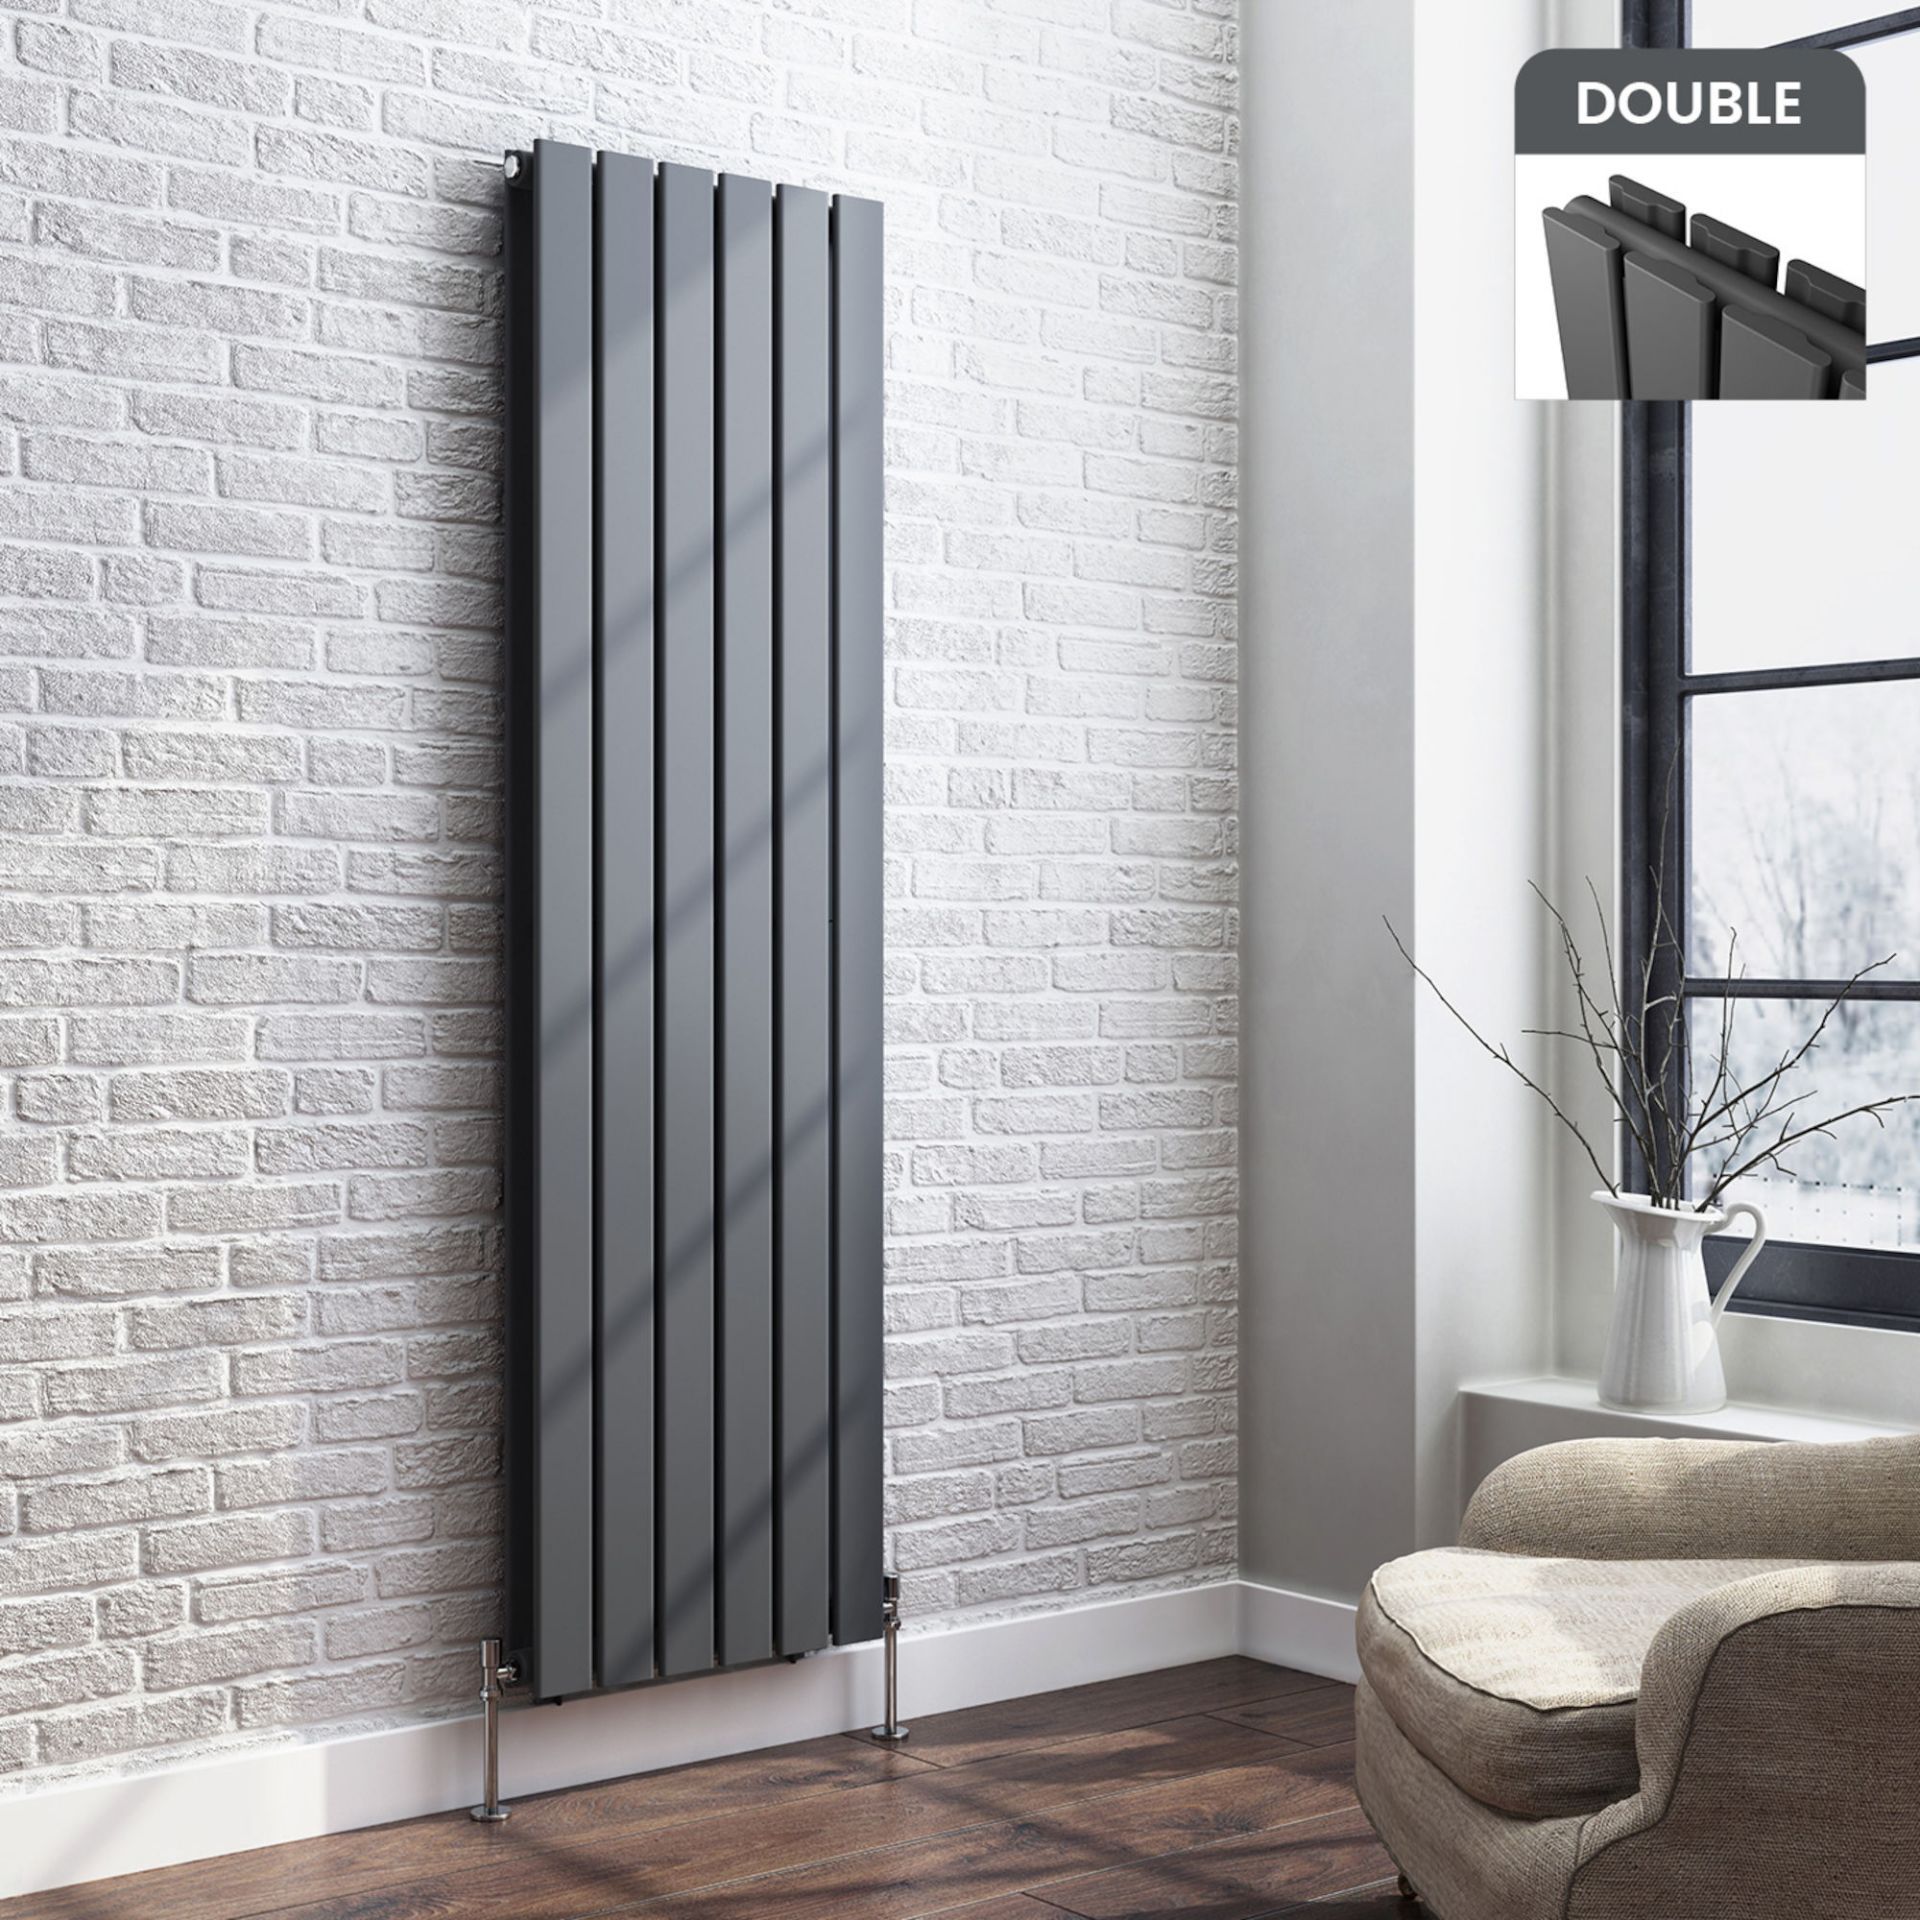 1600x480mm Anthracite Double Flat Panel Vertical Radiator. RRP £458.99. Made with low carbon steel